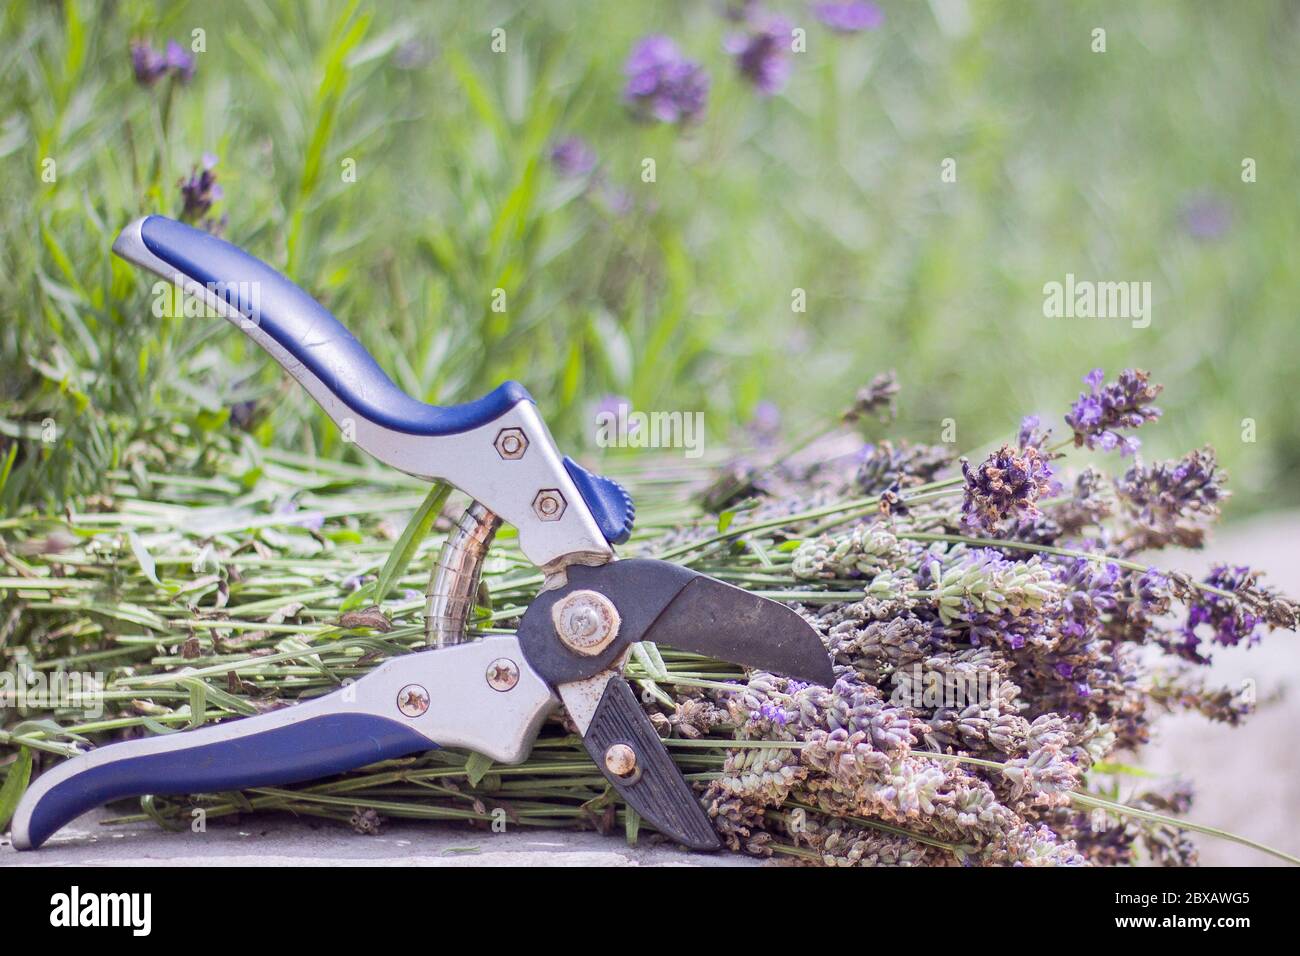 bunch of ripe lavender harvested, against the background of growing bushes of lavender, secateurs tool for cutting lavender. Stock Photo